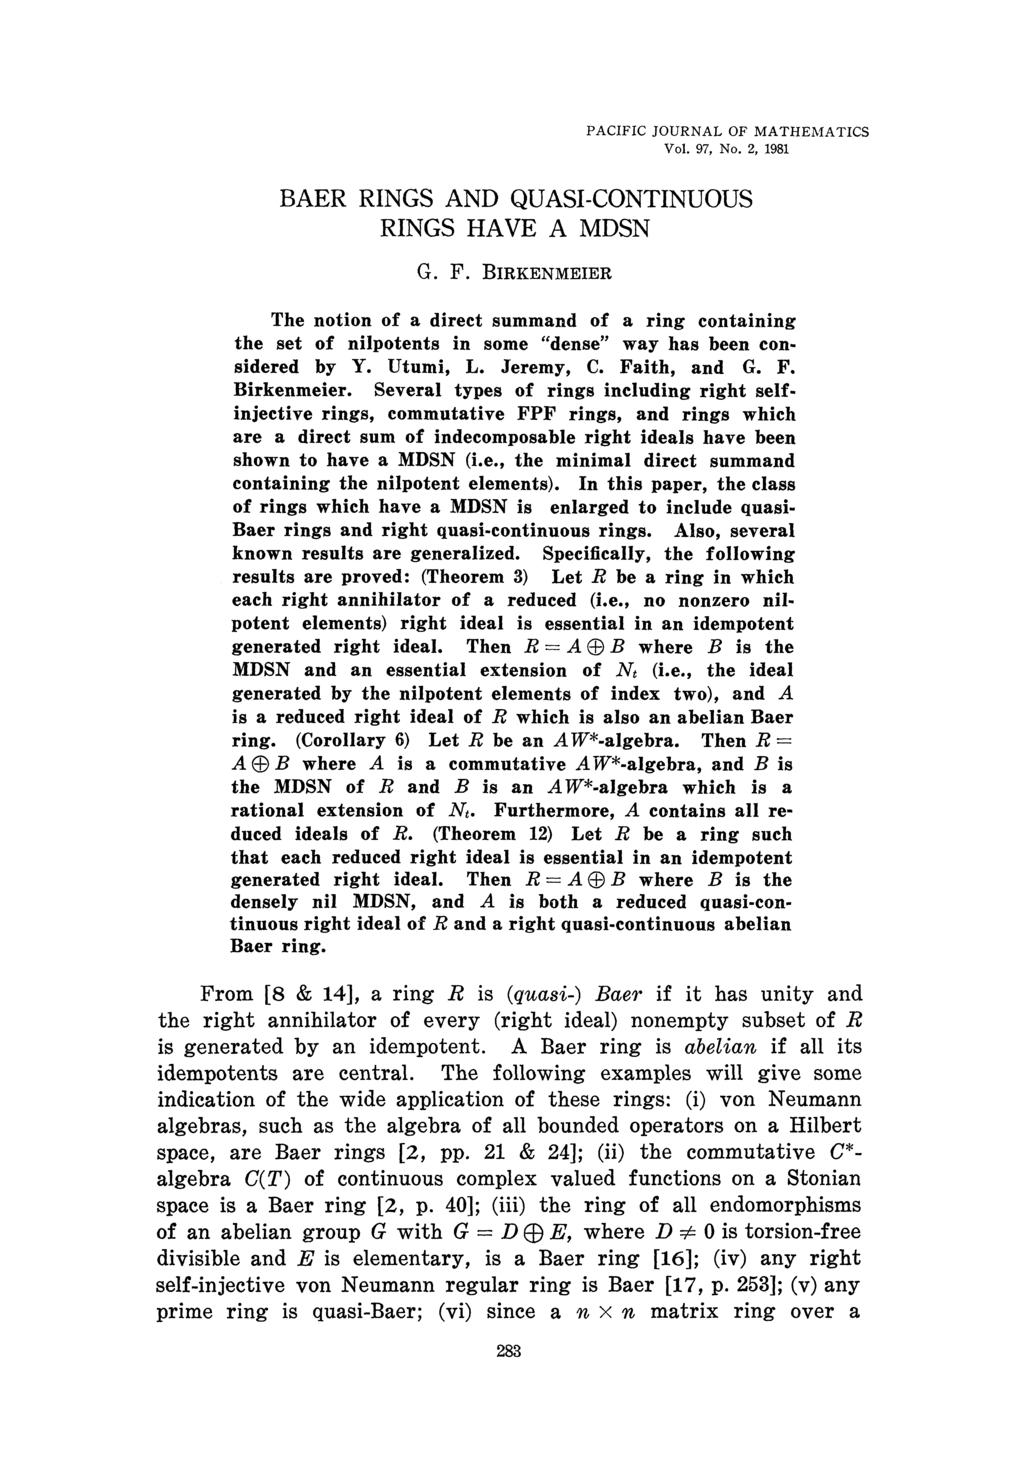 PACIFIC JOURNAL OF MATHEMATICS Vol. 97, No. 2, 1981 BAER RINGS AND QUASI-CONTINUOUS RINGS HAVE A MDSN G. F.